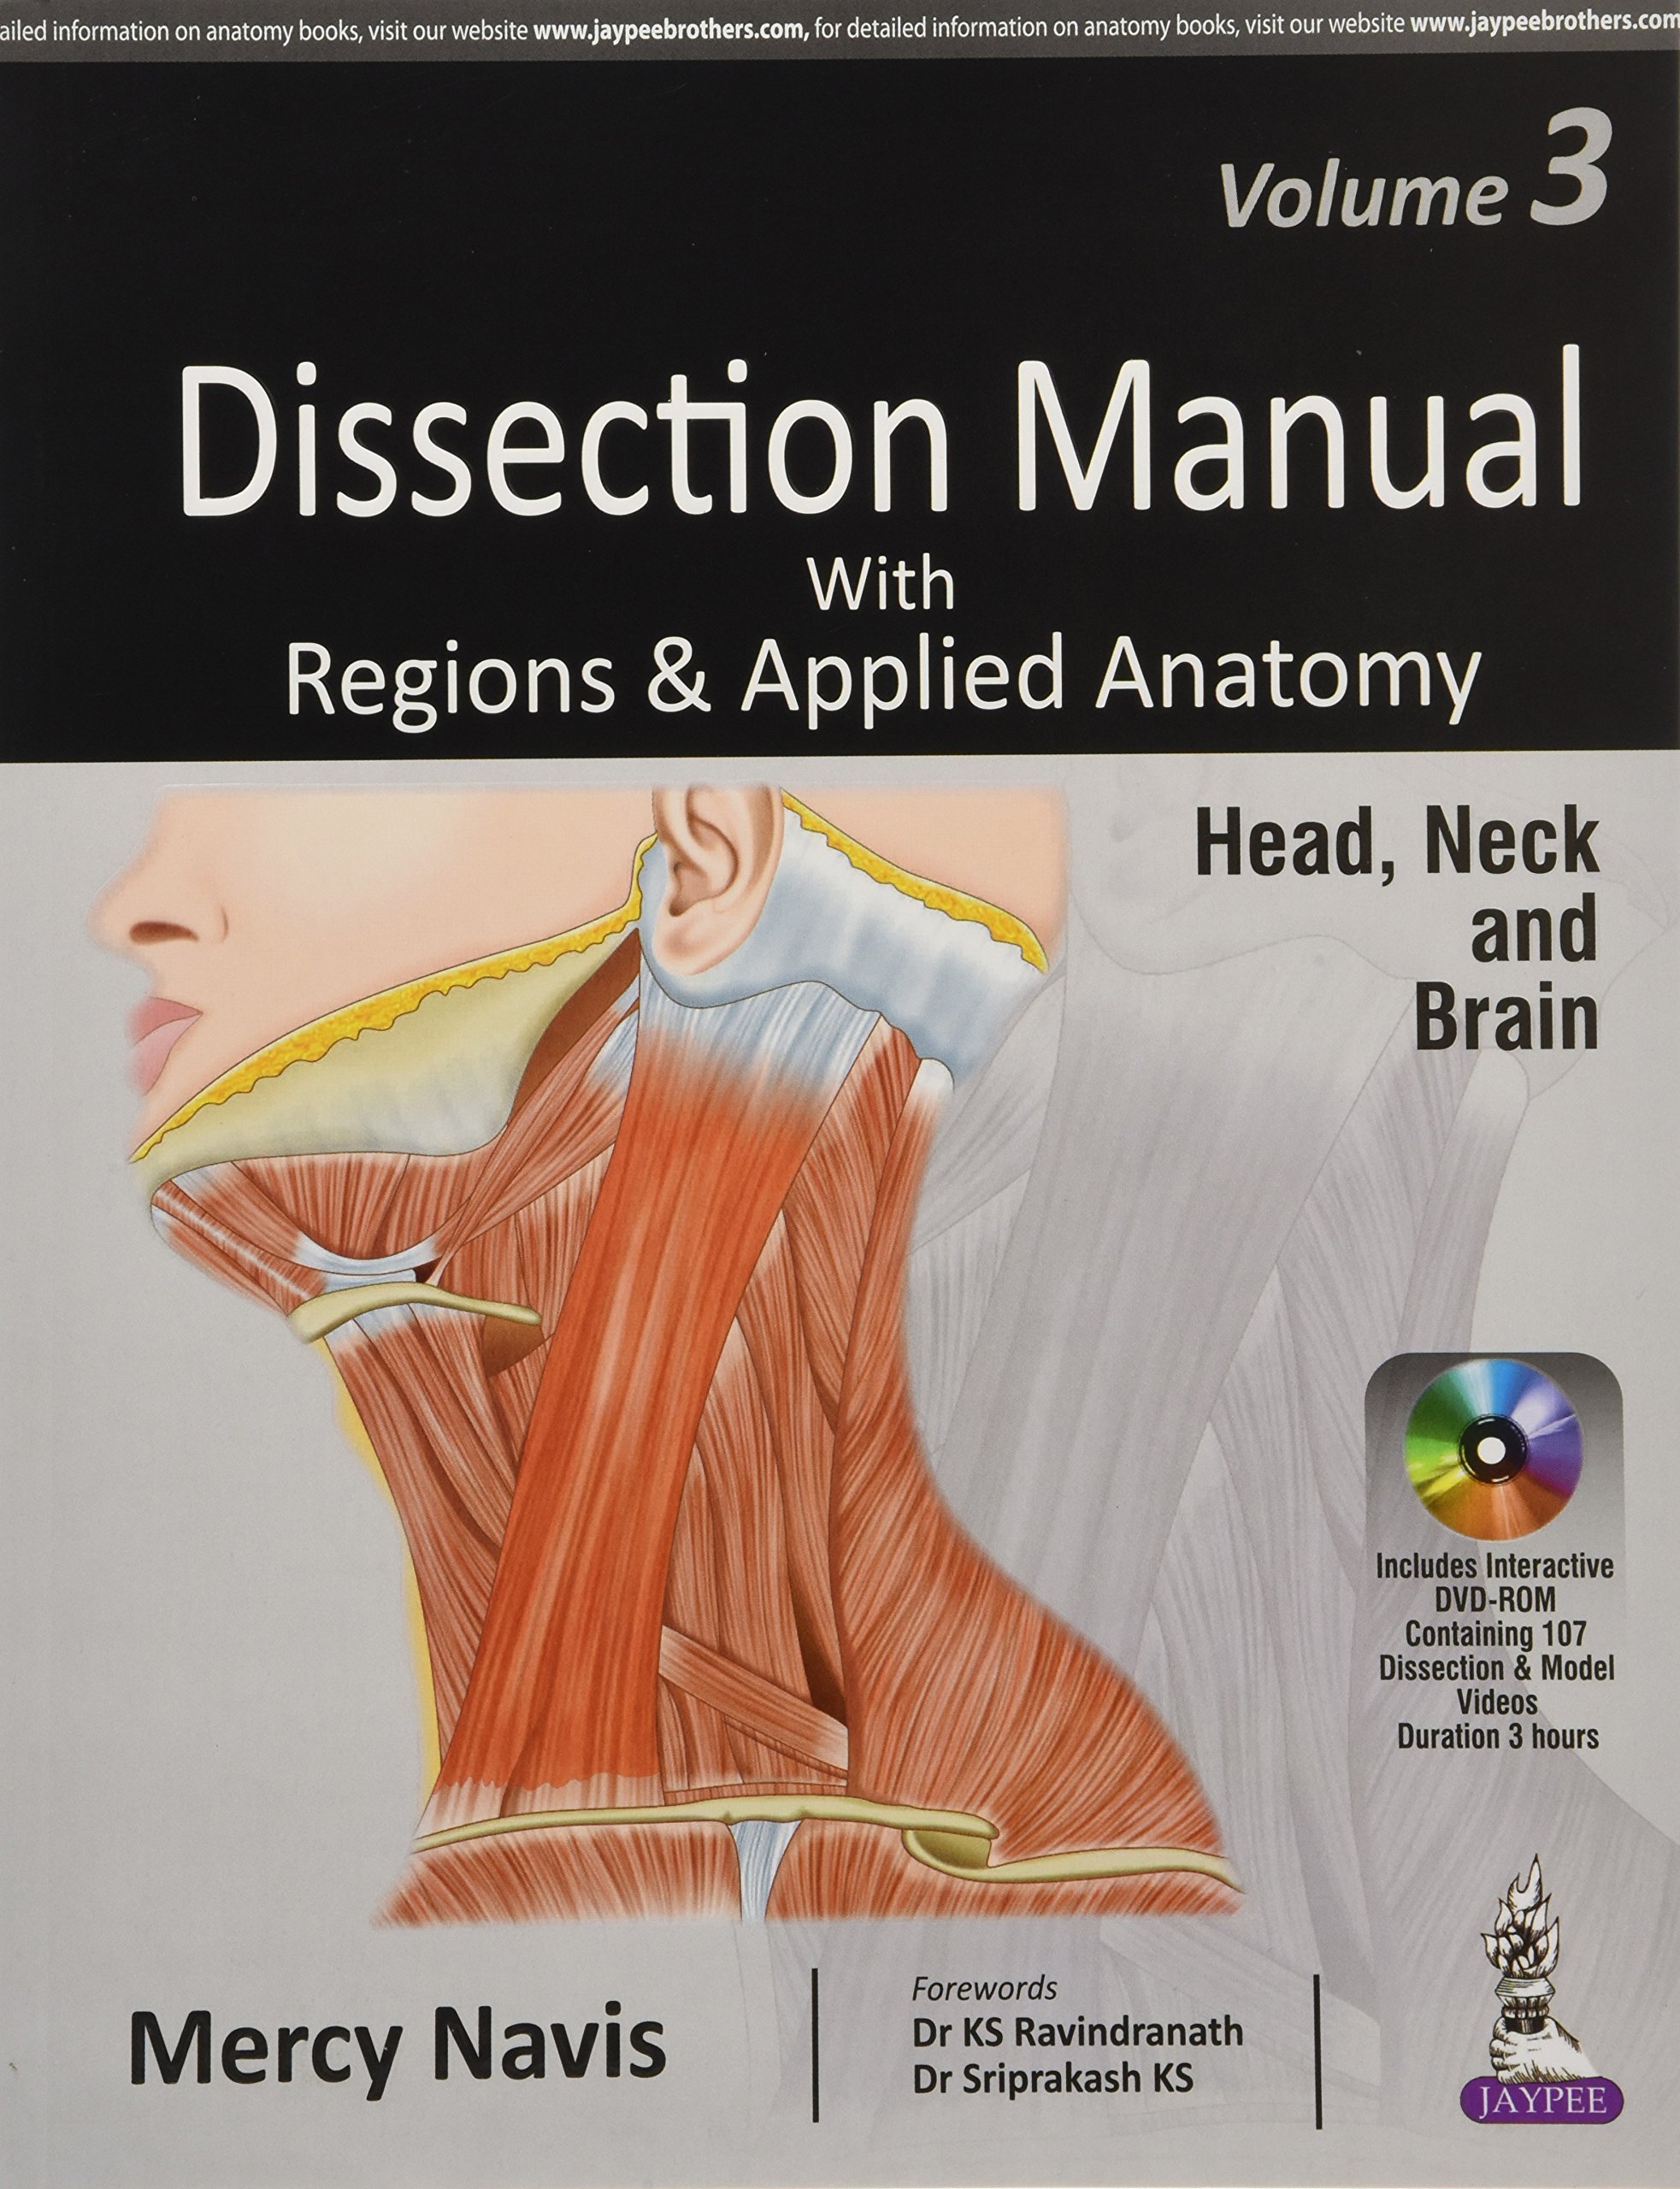 Dissection Manual With Regions & Applied Anatomy Head, Neck And Brain Vol.3 With Dvd-Rom